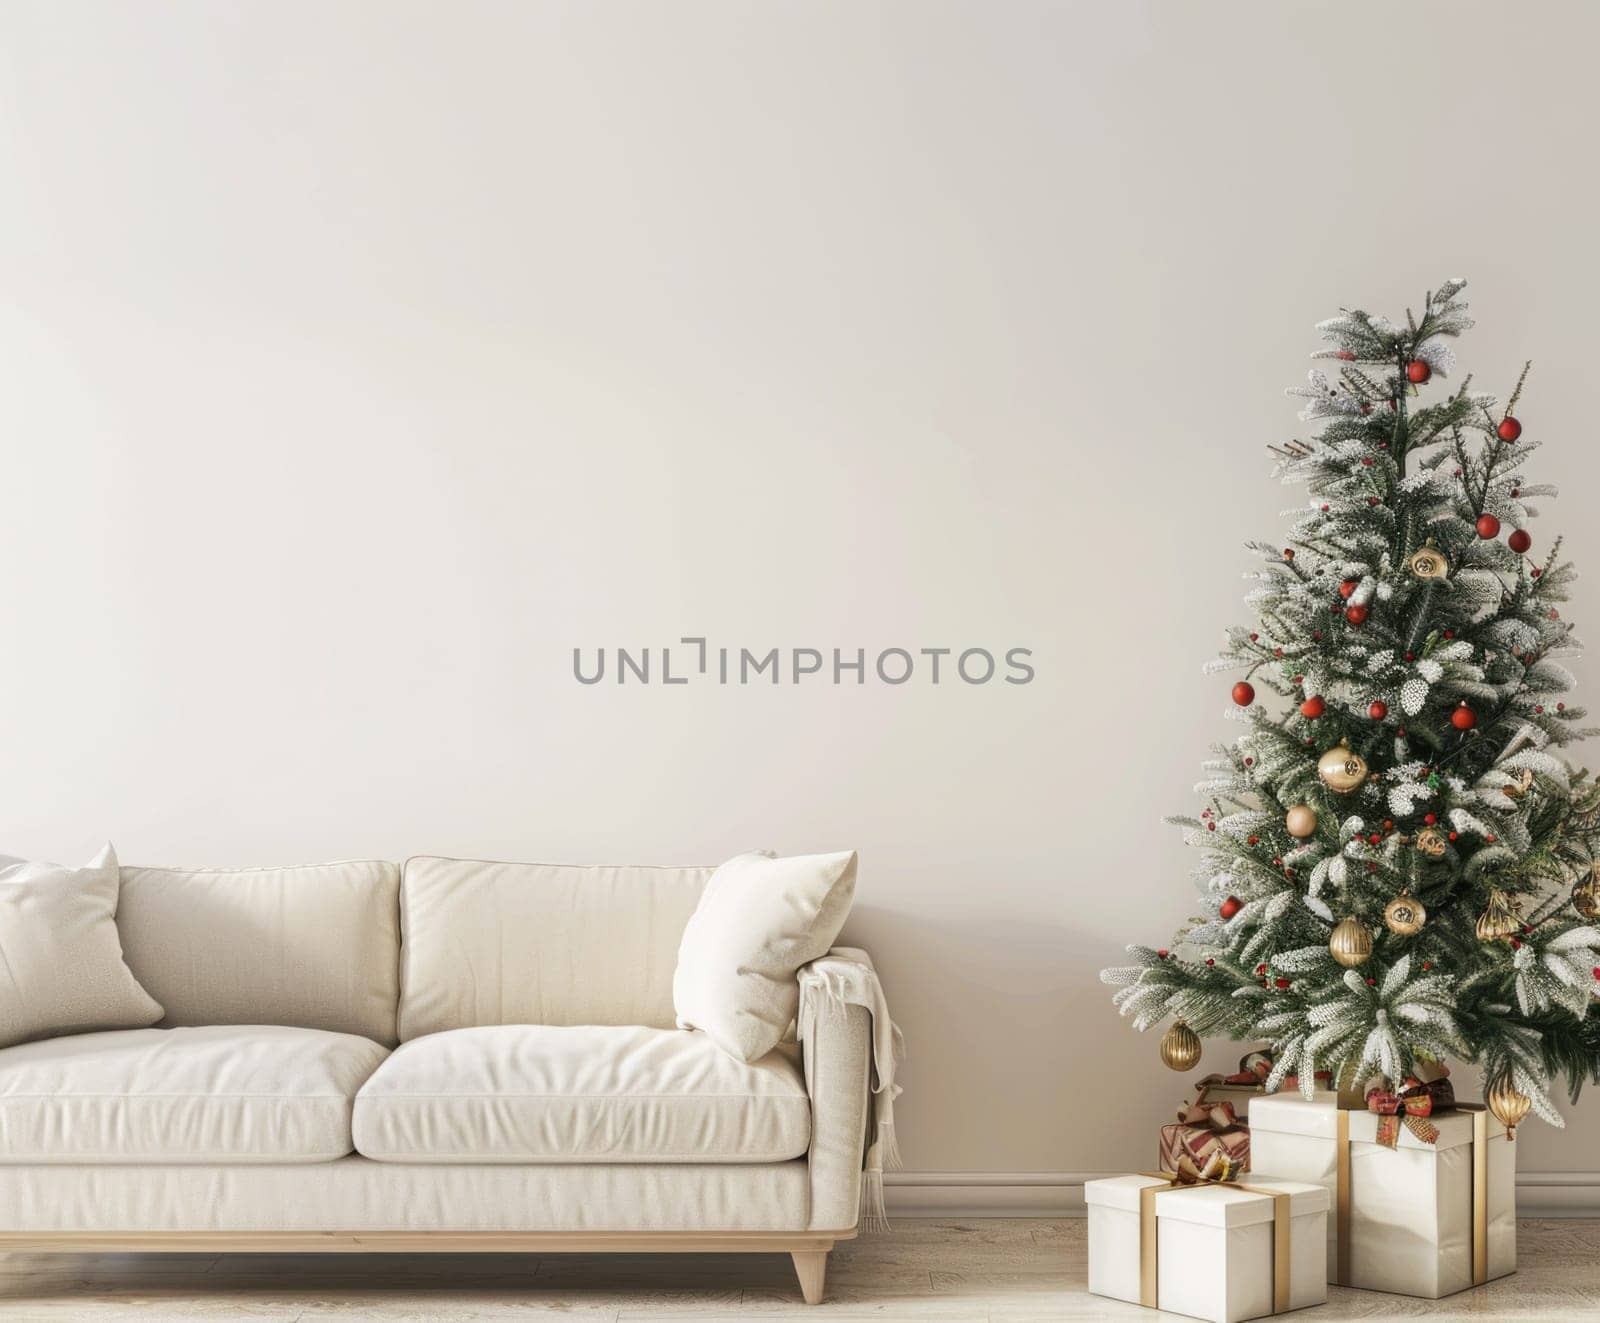 Christmas tree and white couch in elegant living room with copy space for holiday decor stock photo by Vichizh